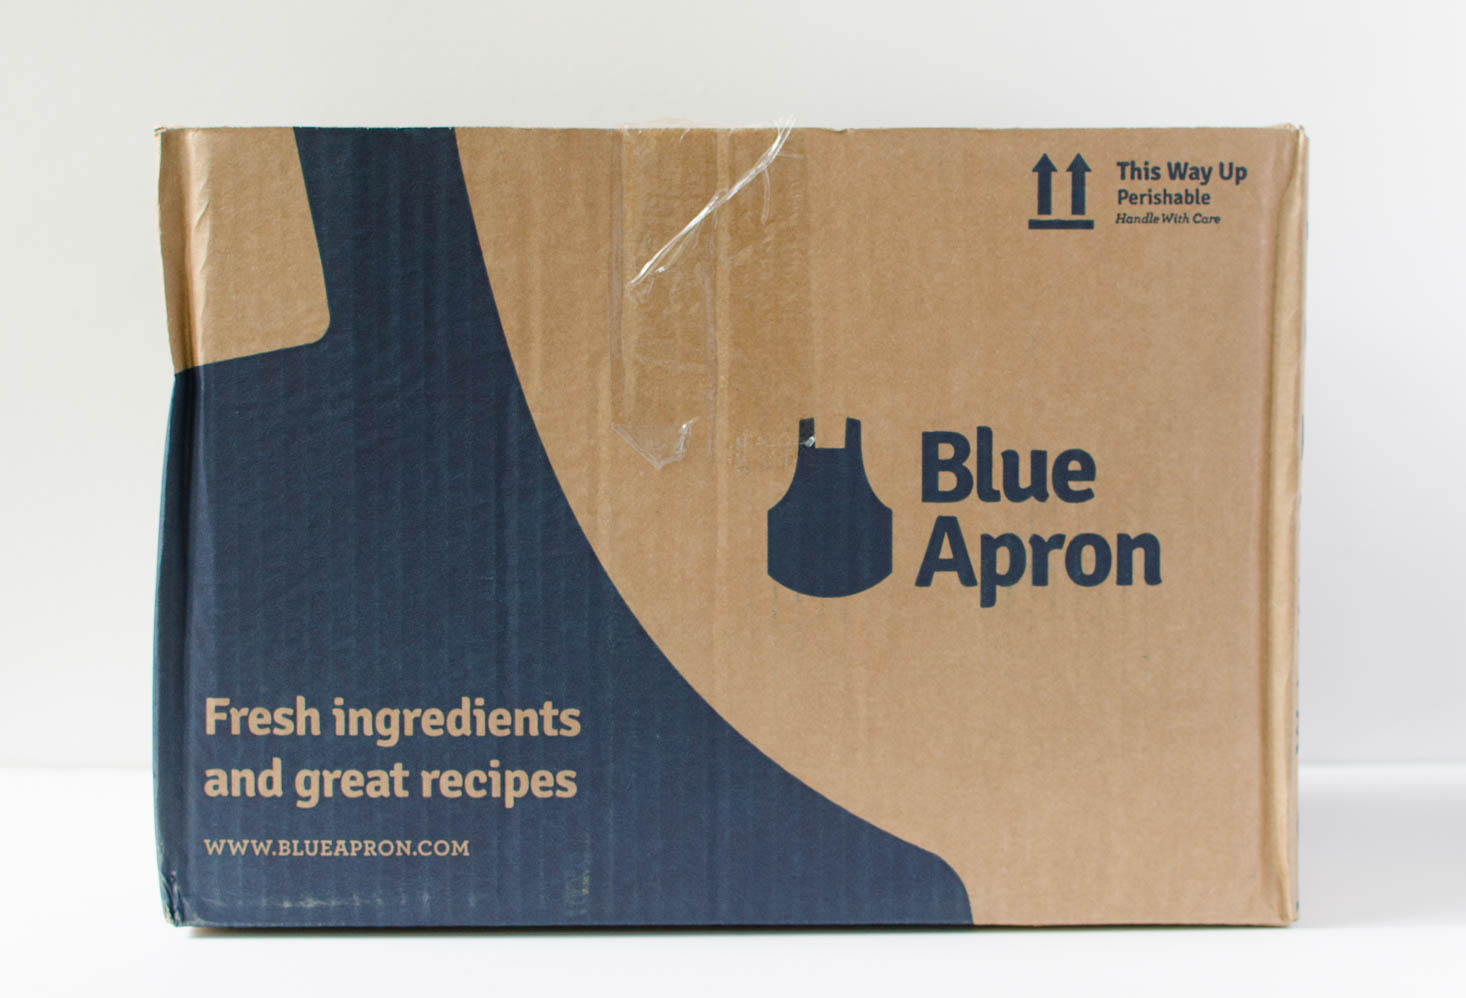 Blue Apron Black Friday Deal – Save $32 Off Your First Box!